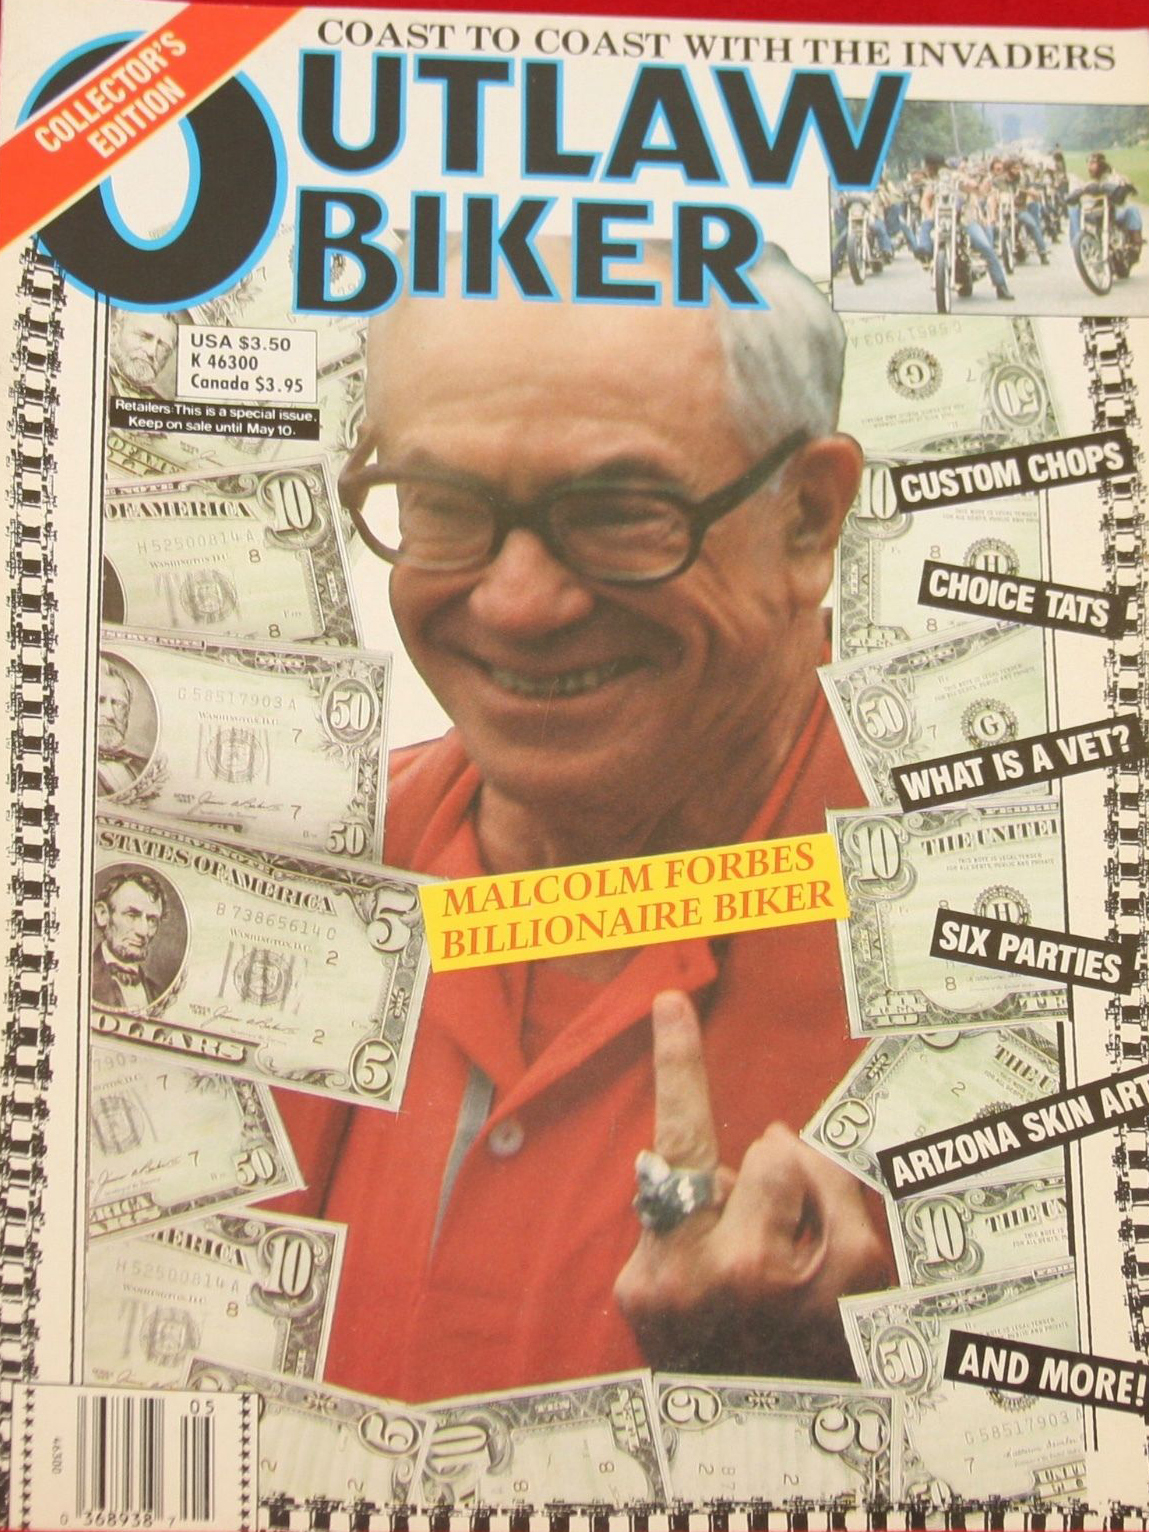 Outlaw Biker May 1988 magazine back issue Outlaw Biker magizine back copy Outlaw Biker May 1988 Magazine Back Issue for Bike Riding Rebels and Members of Outlaw Motorcycle Clubs. Coast To Coast With The Invaders.